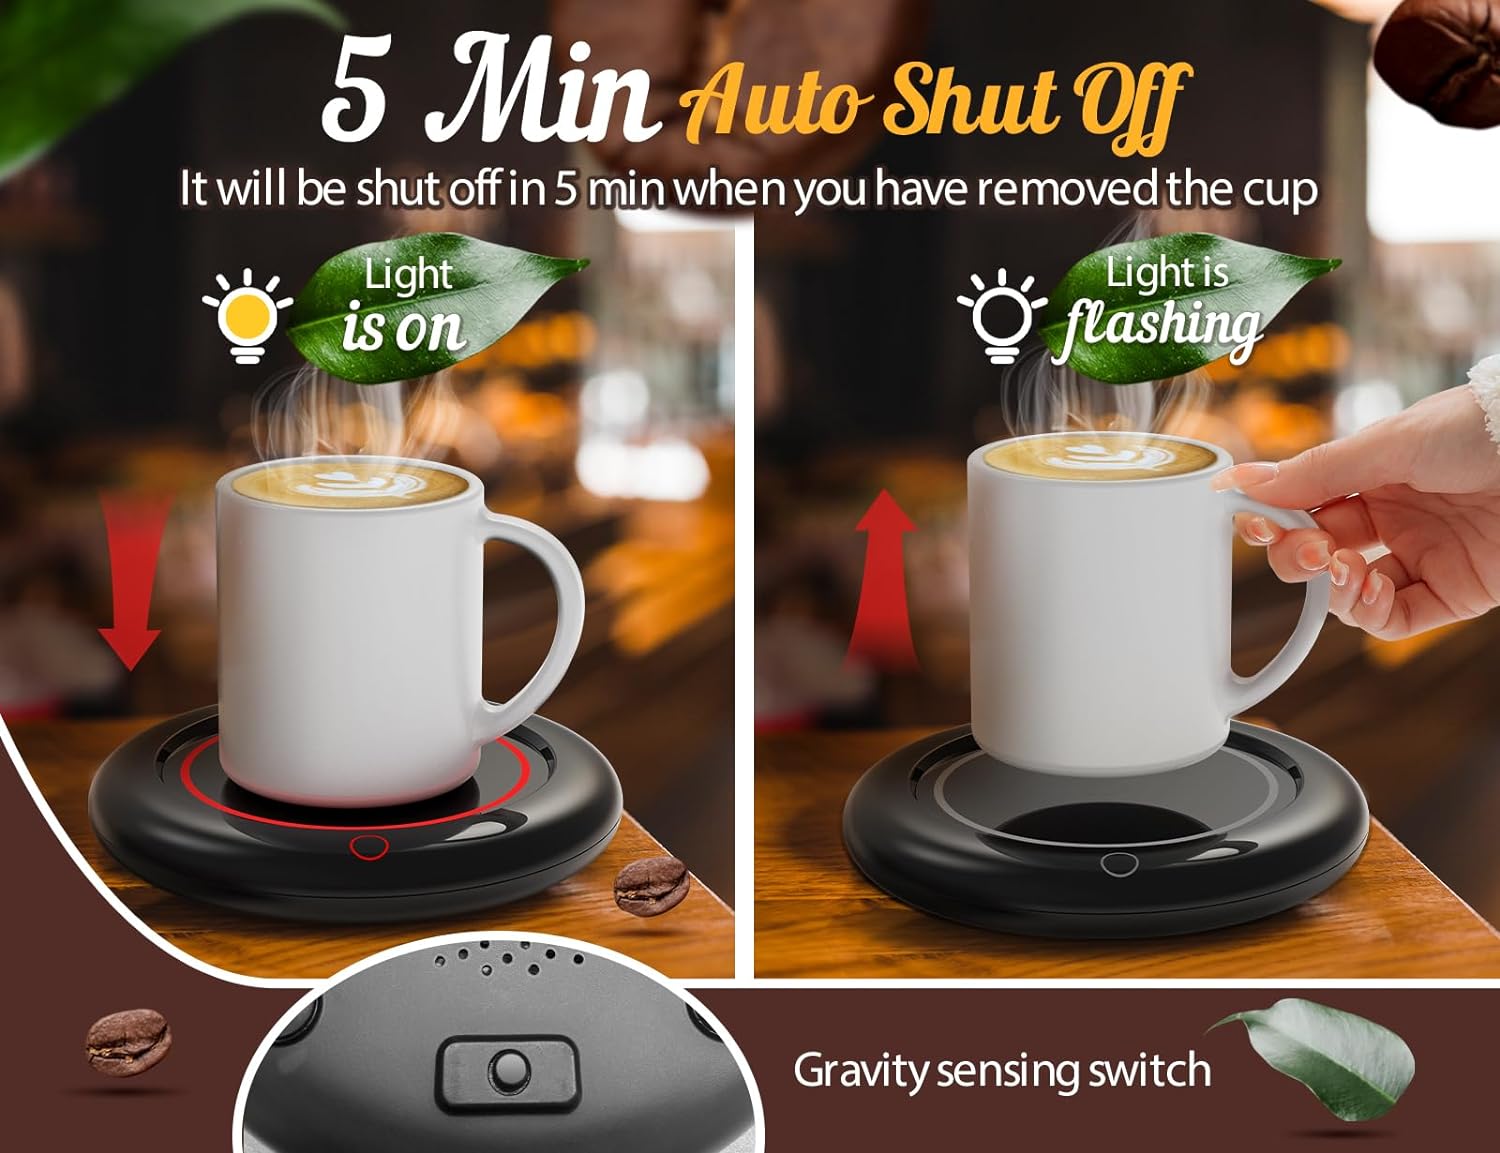 Candle Warmer, Coffee Warmer for Desk Auto Shut Off with 3 Temp Settings (149℉/131℉/113℉), Mug Warmer Compatible with Almost All Cups & Jar Candles, Cup Warmer Coffee Heater for Coffee, Milk and Tea